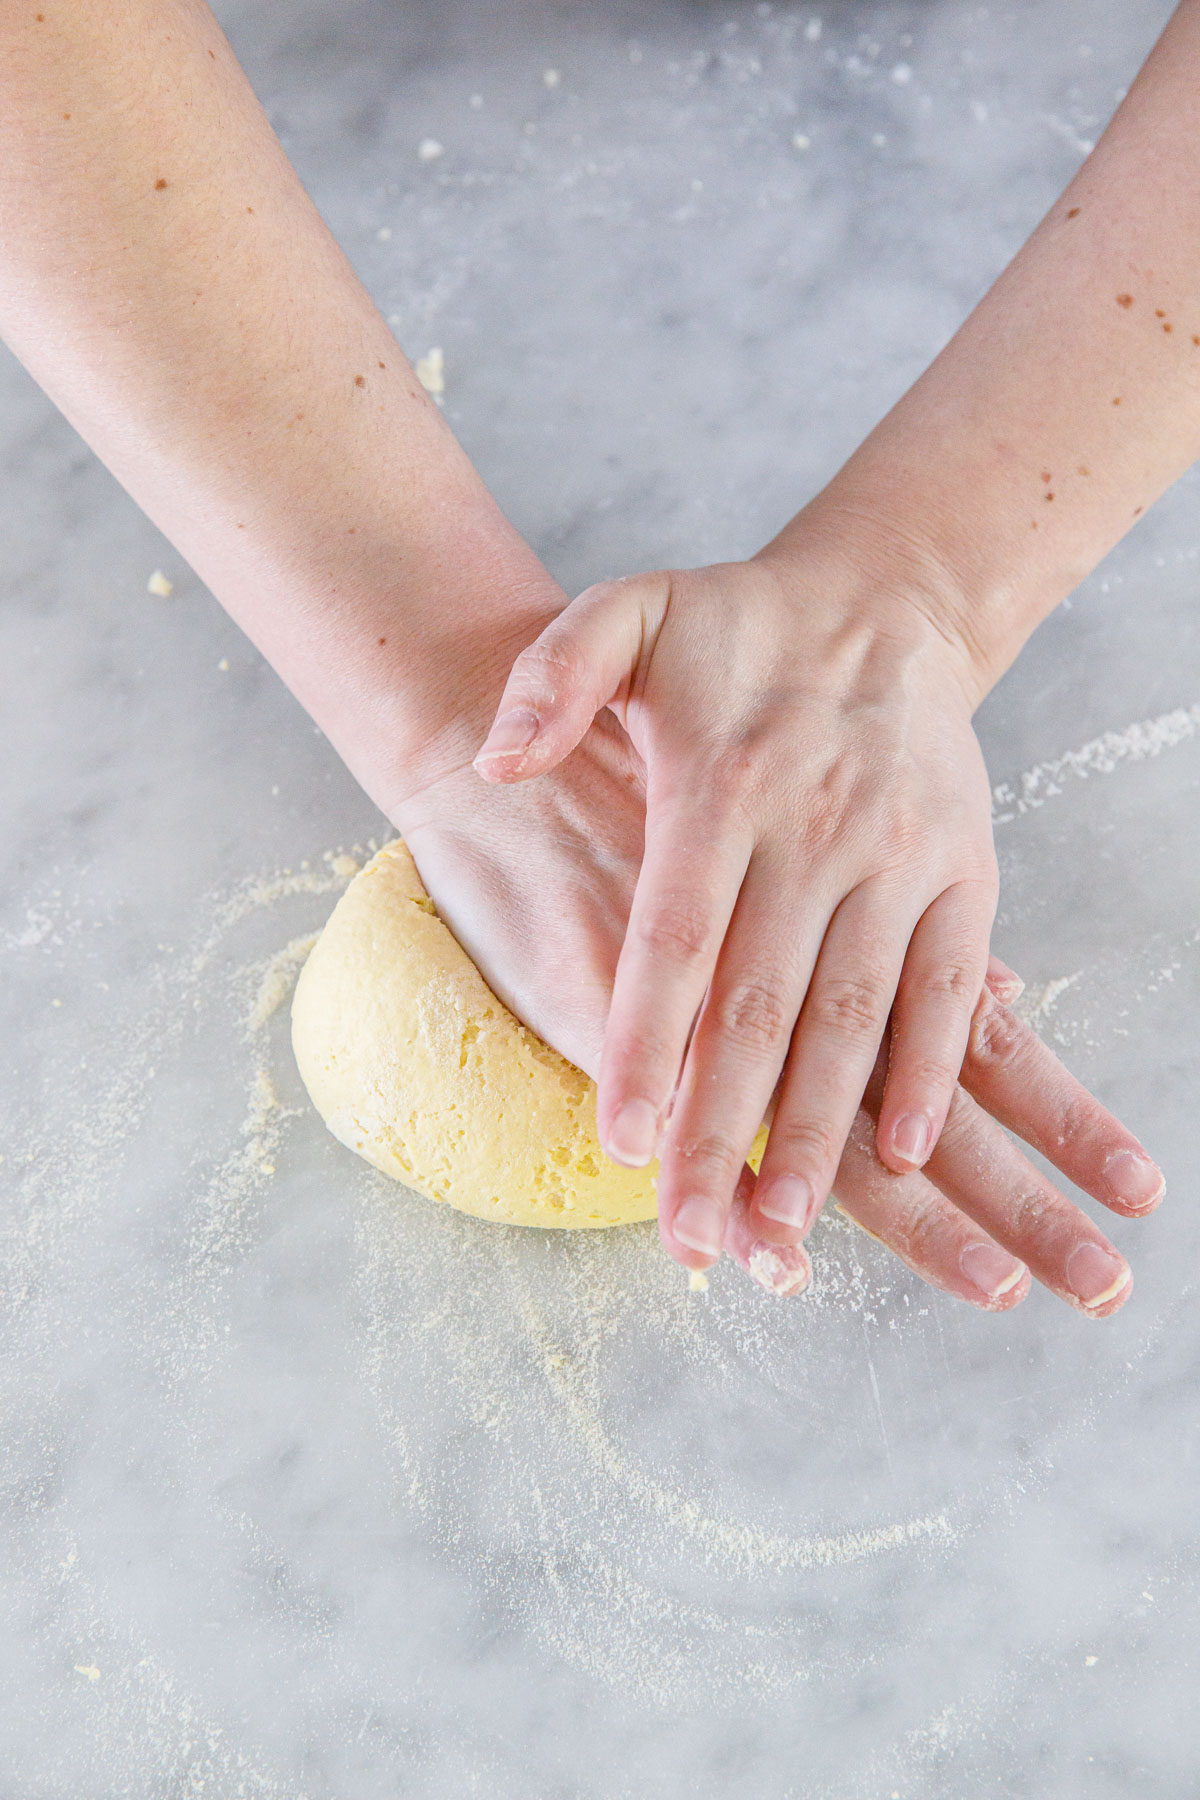 Kneading homemade pasta dough on a marble surface until it is smooth.